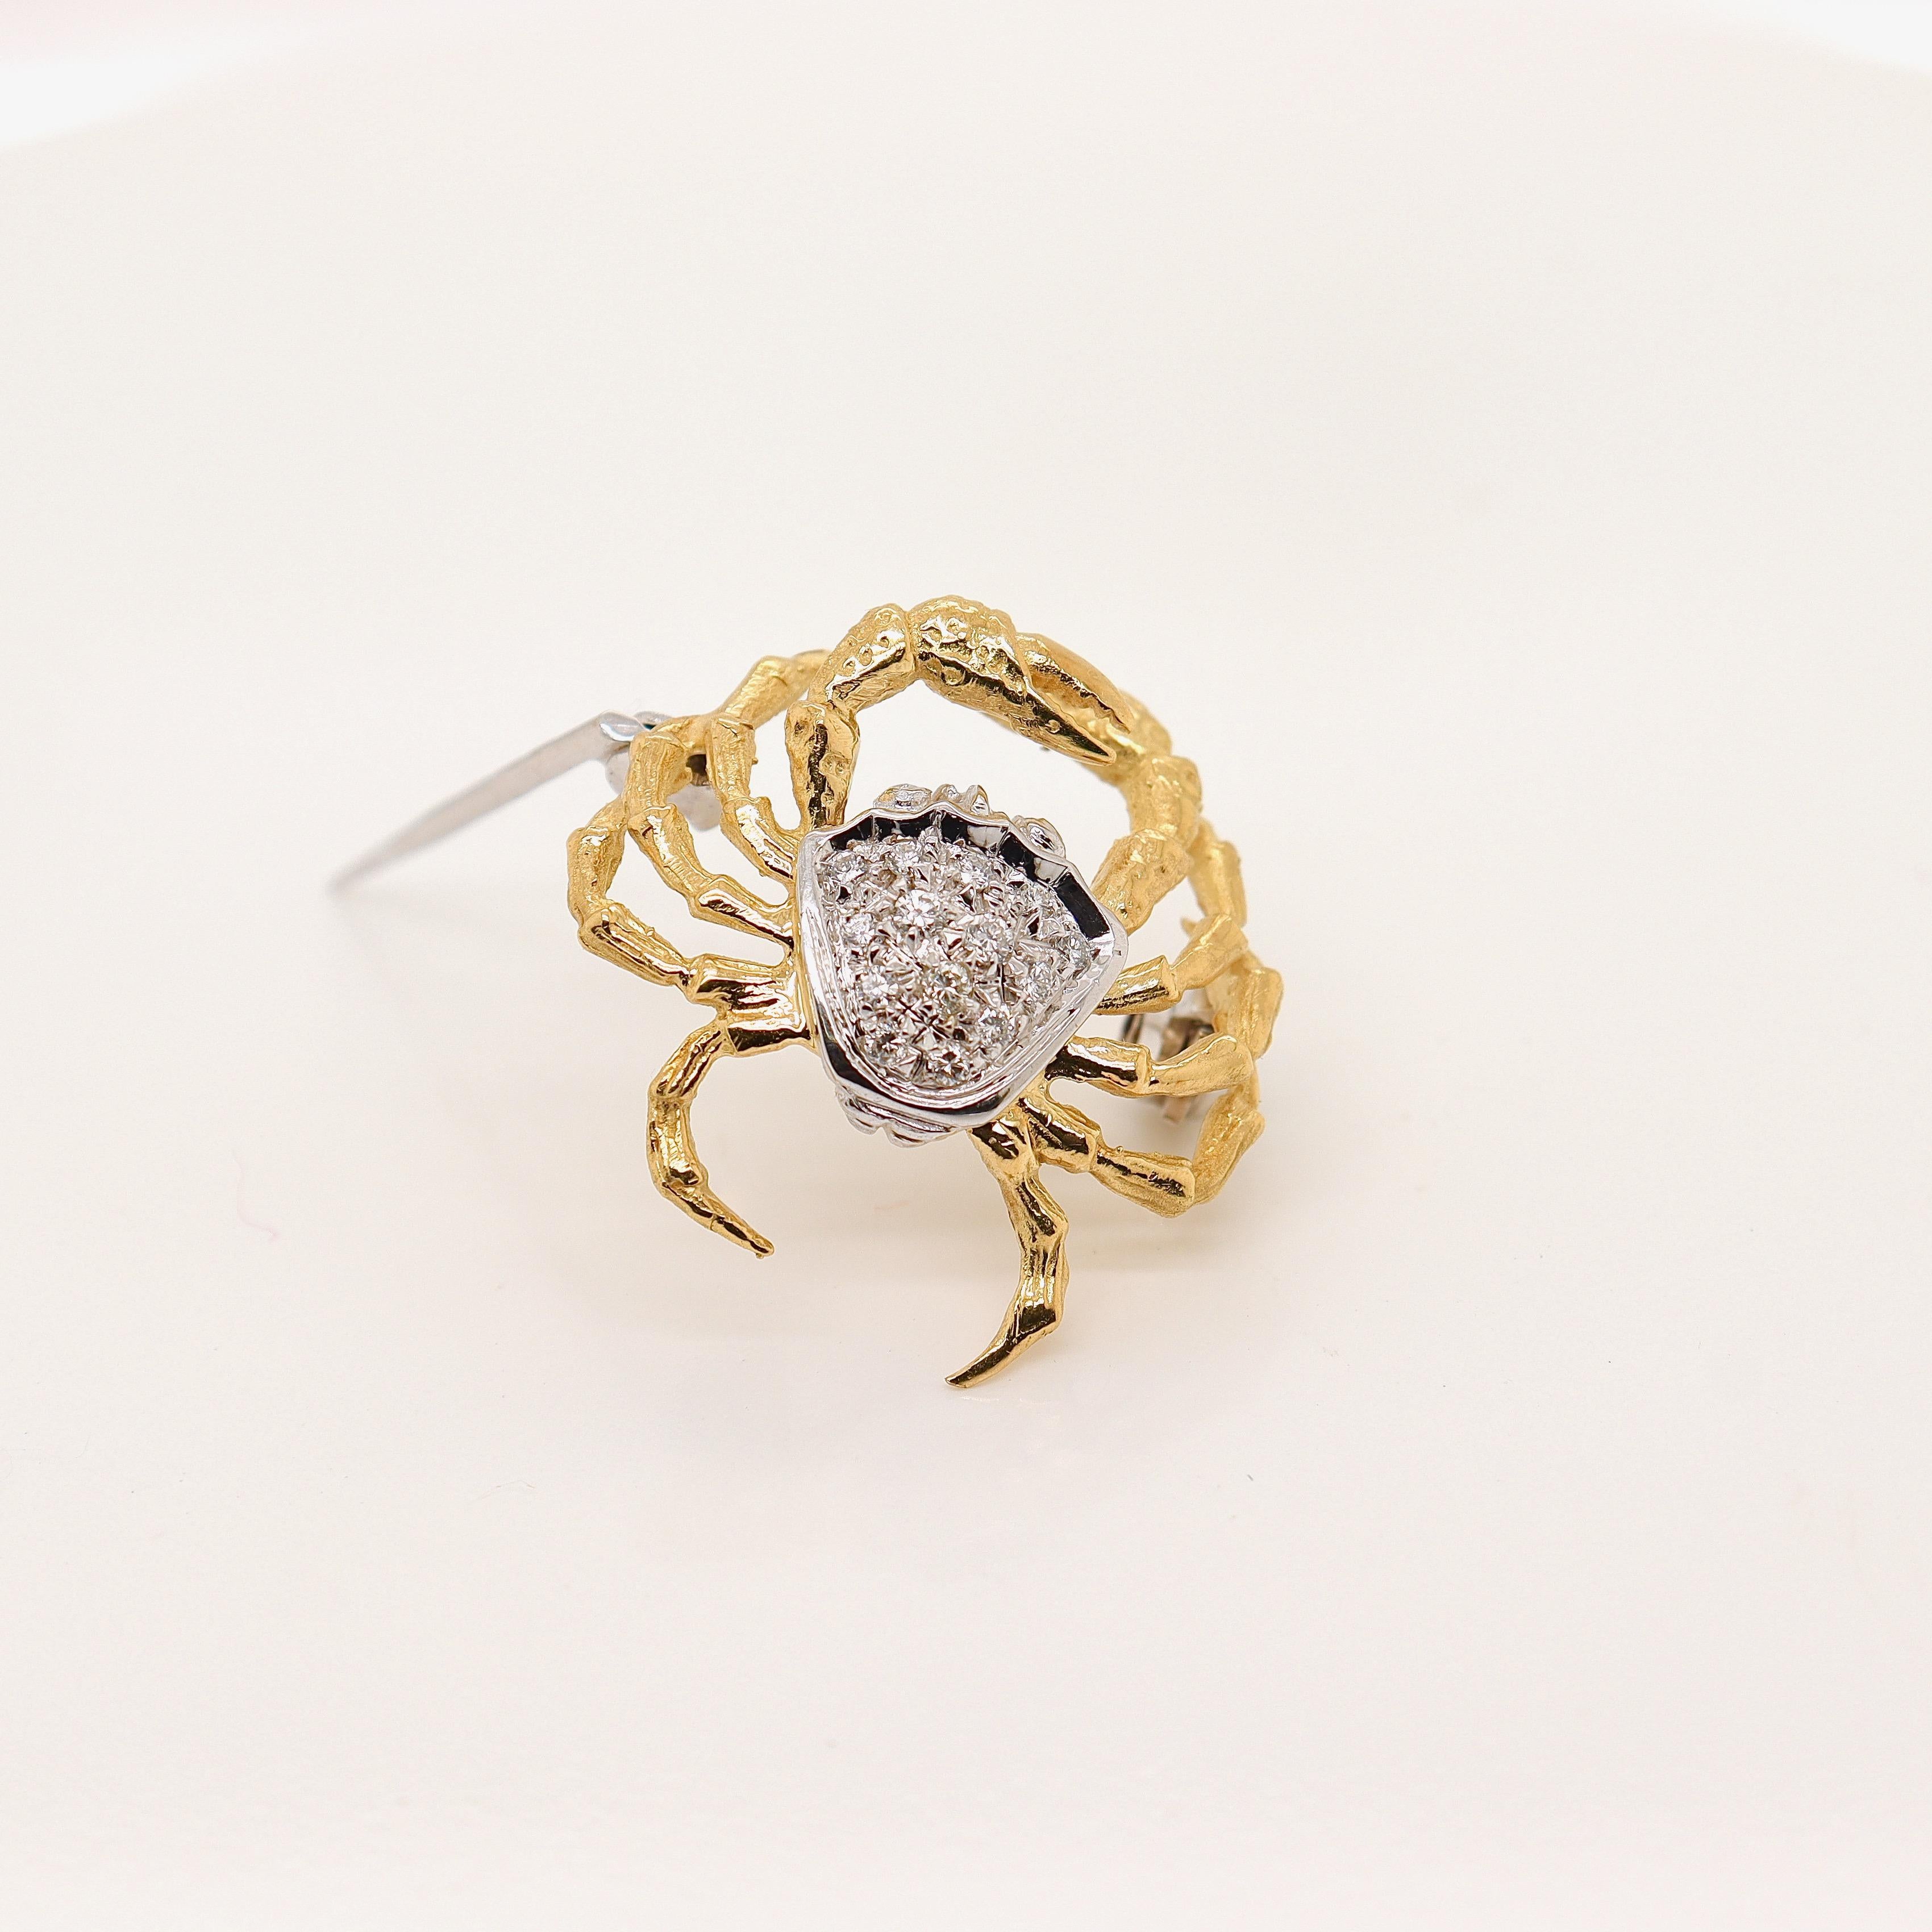 Signed Damiani 18k Gold & Diamond Crab Shaped Brooch or Pin  In Good Condition For Sale In Philadelphia, PA